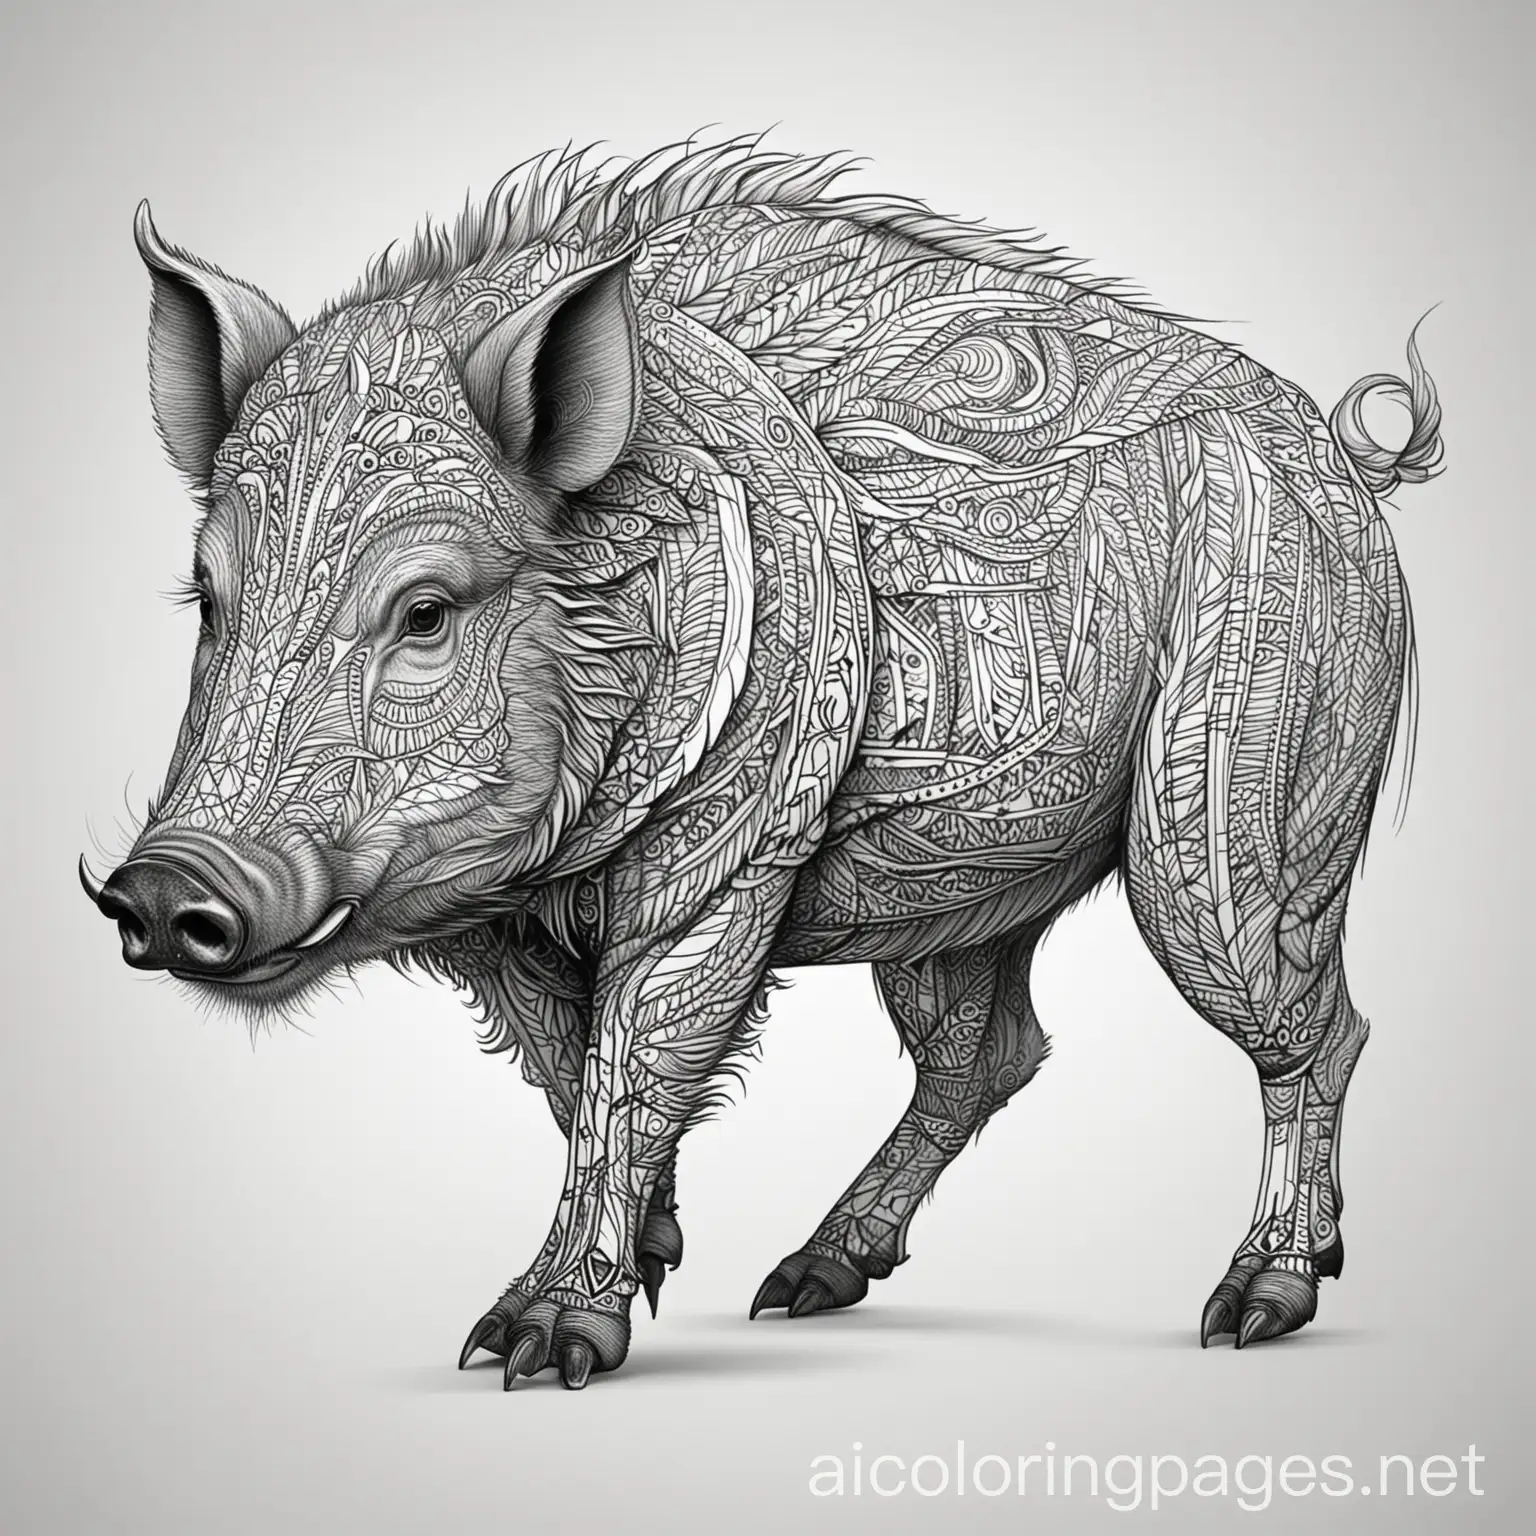 a boar with intricate design, line art, black and white, simplicity, no shading, no color, Coloring Page, black and white, line art, white background, Simplicity, Ample White Space